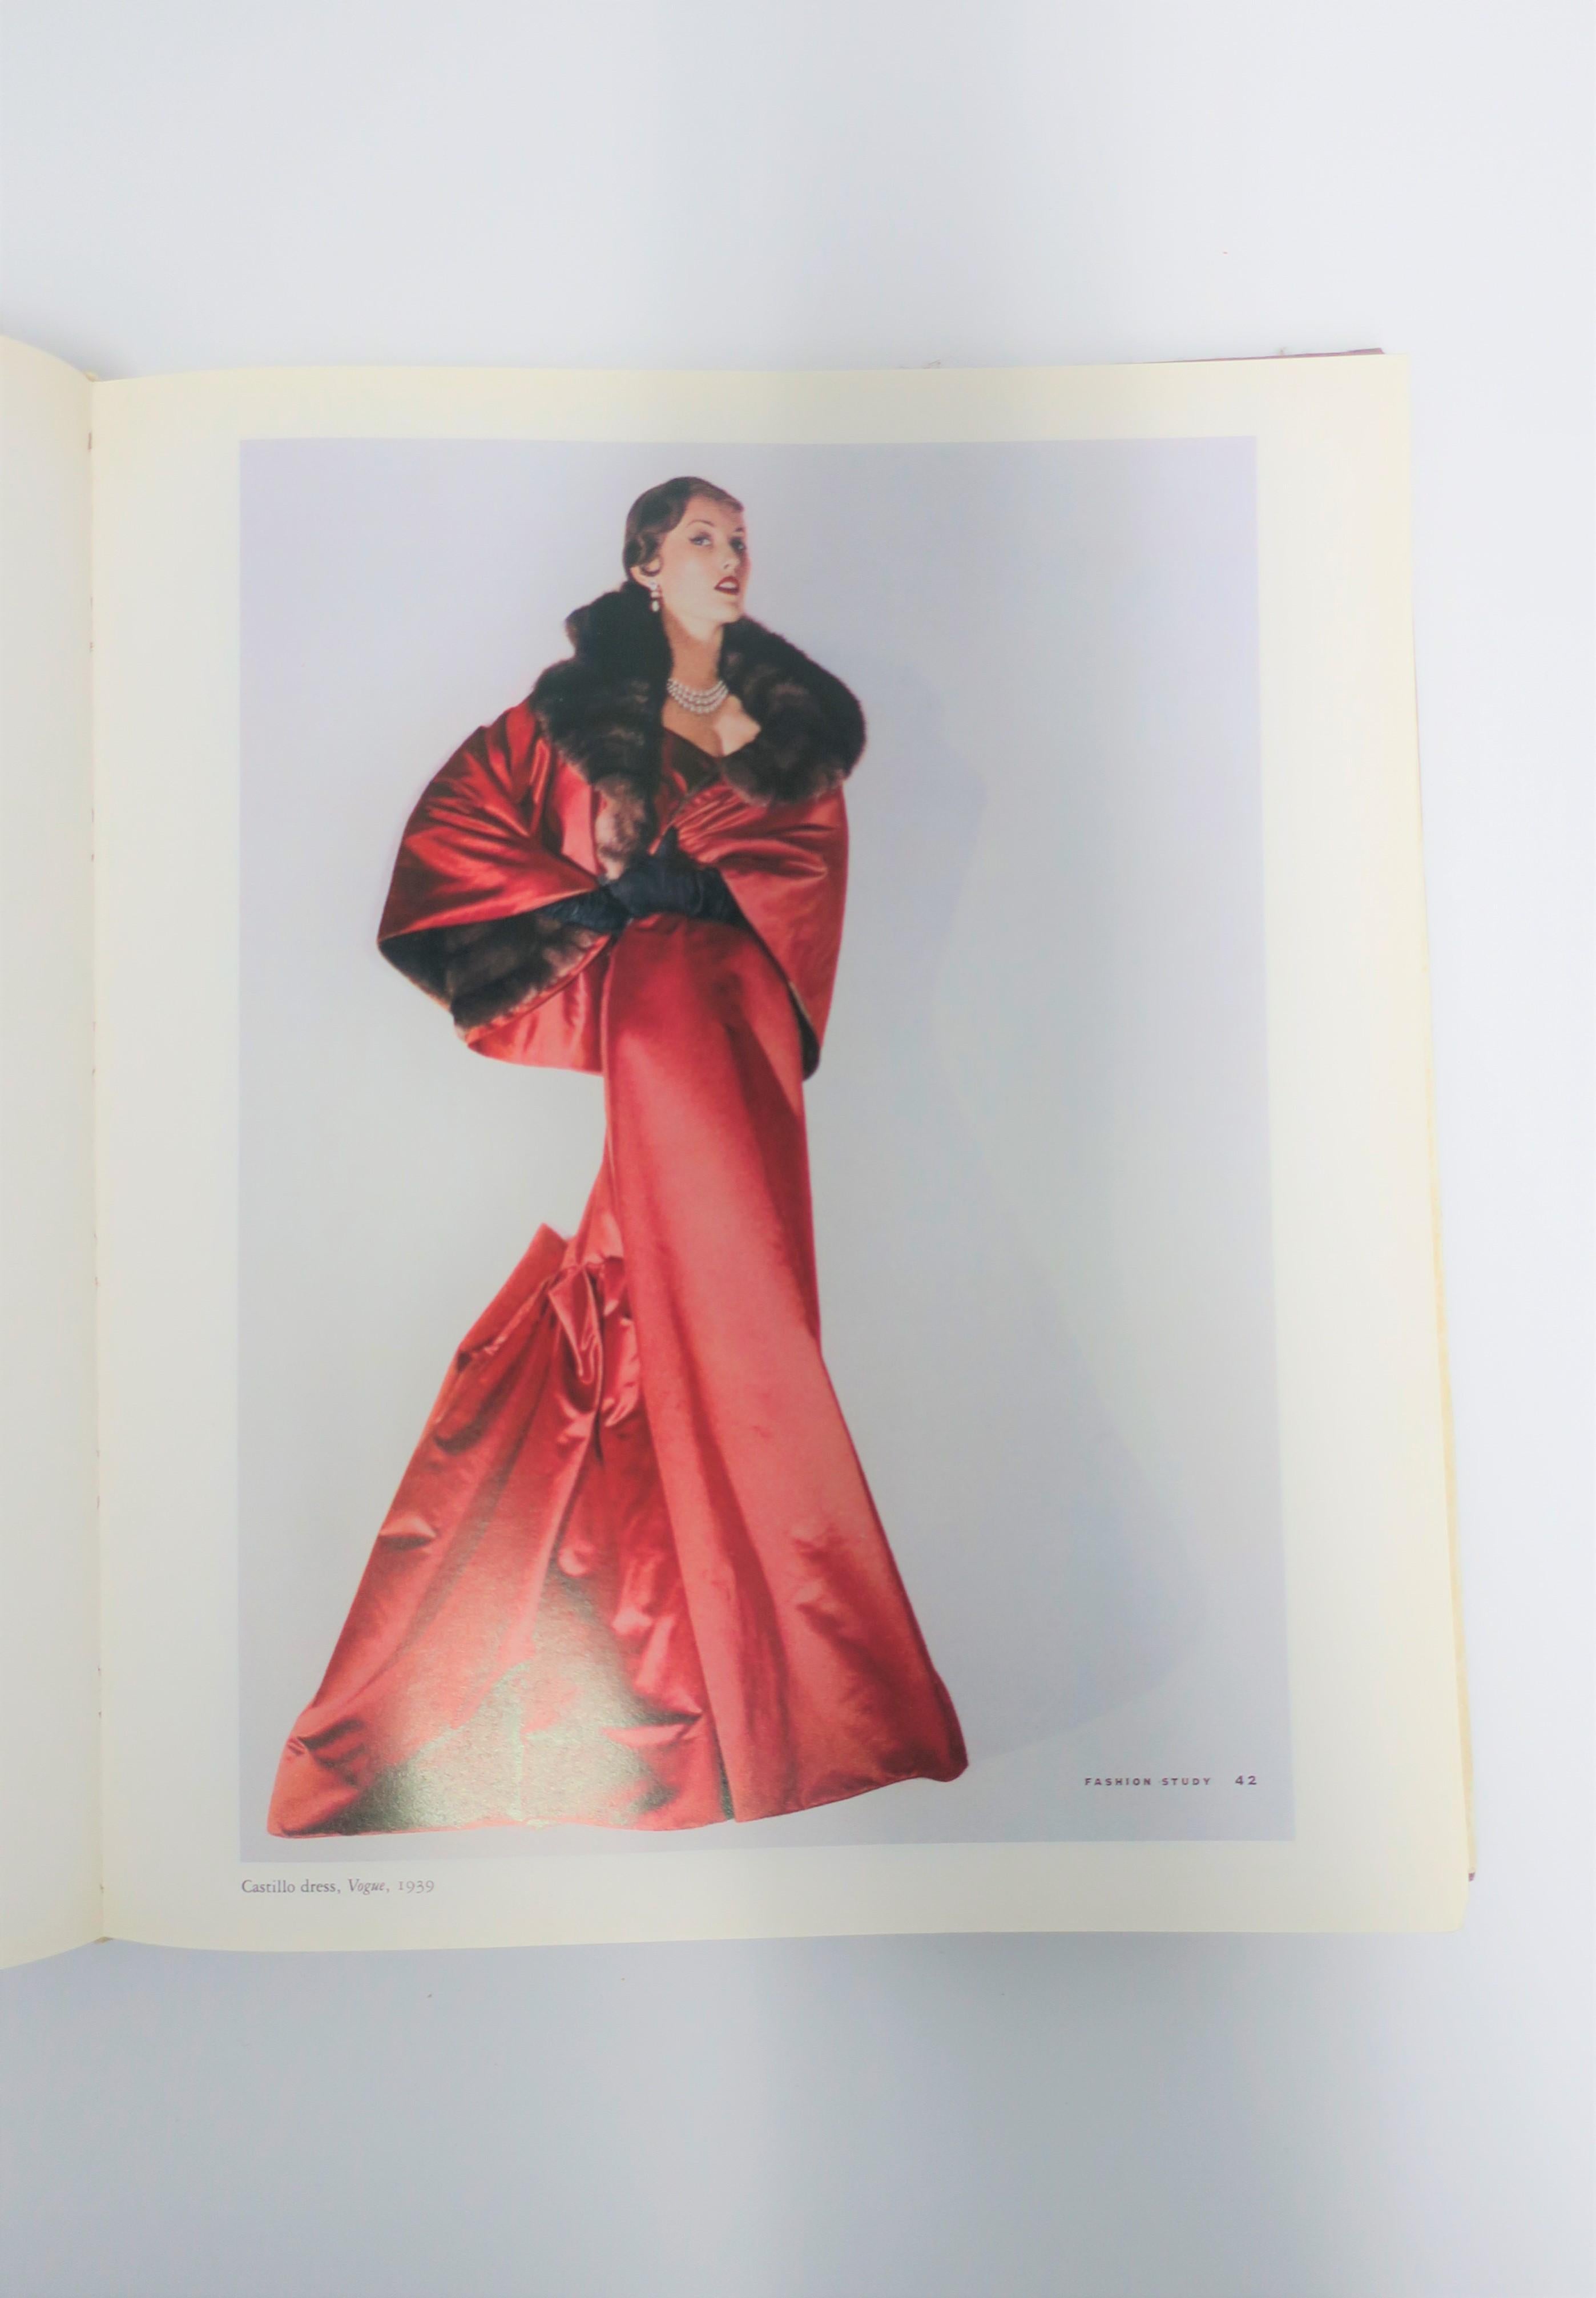 Horst Coffee Table Book, First Edition, 1984 6